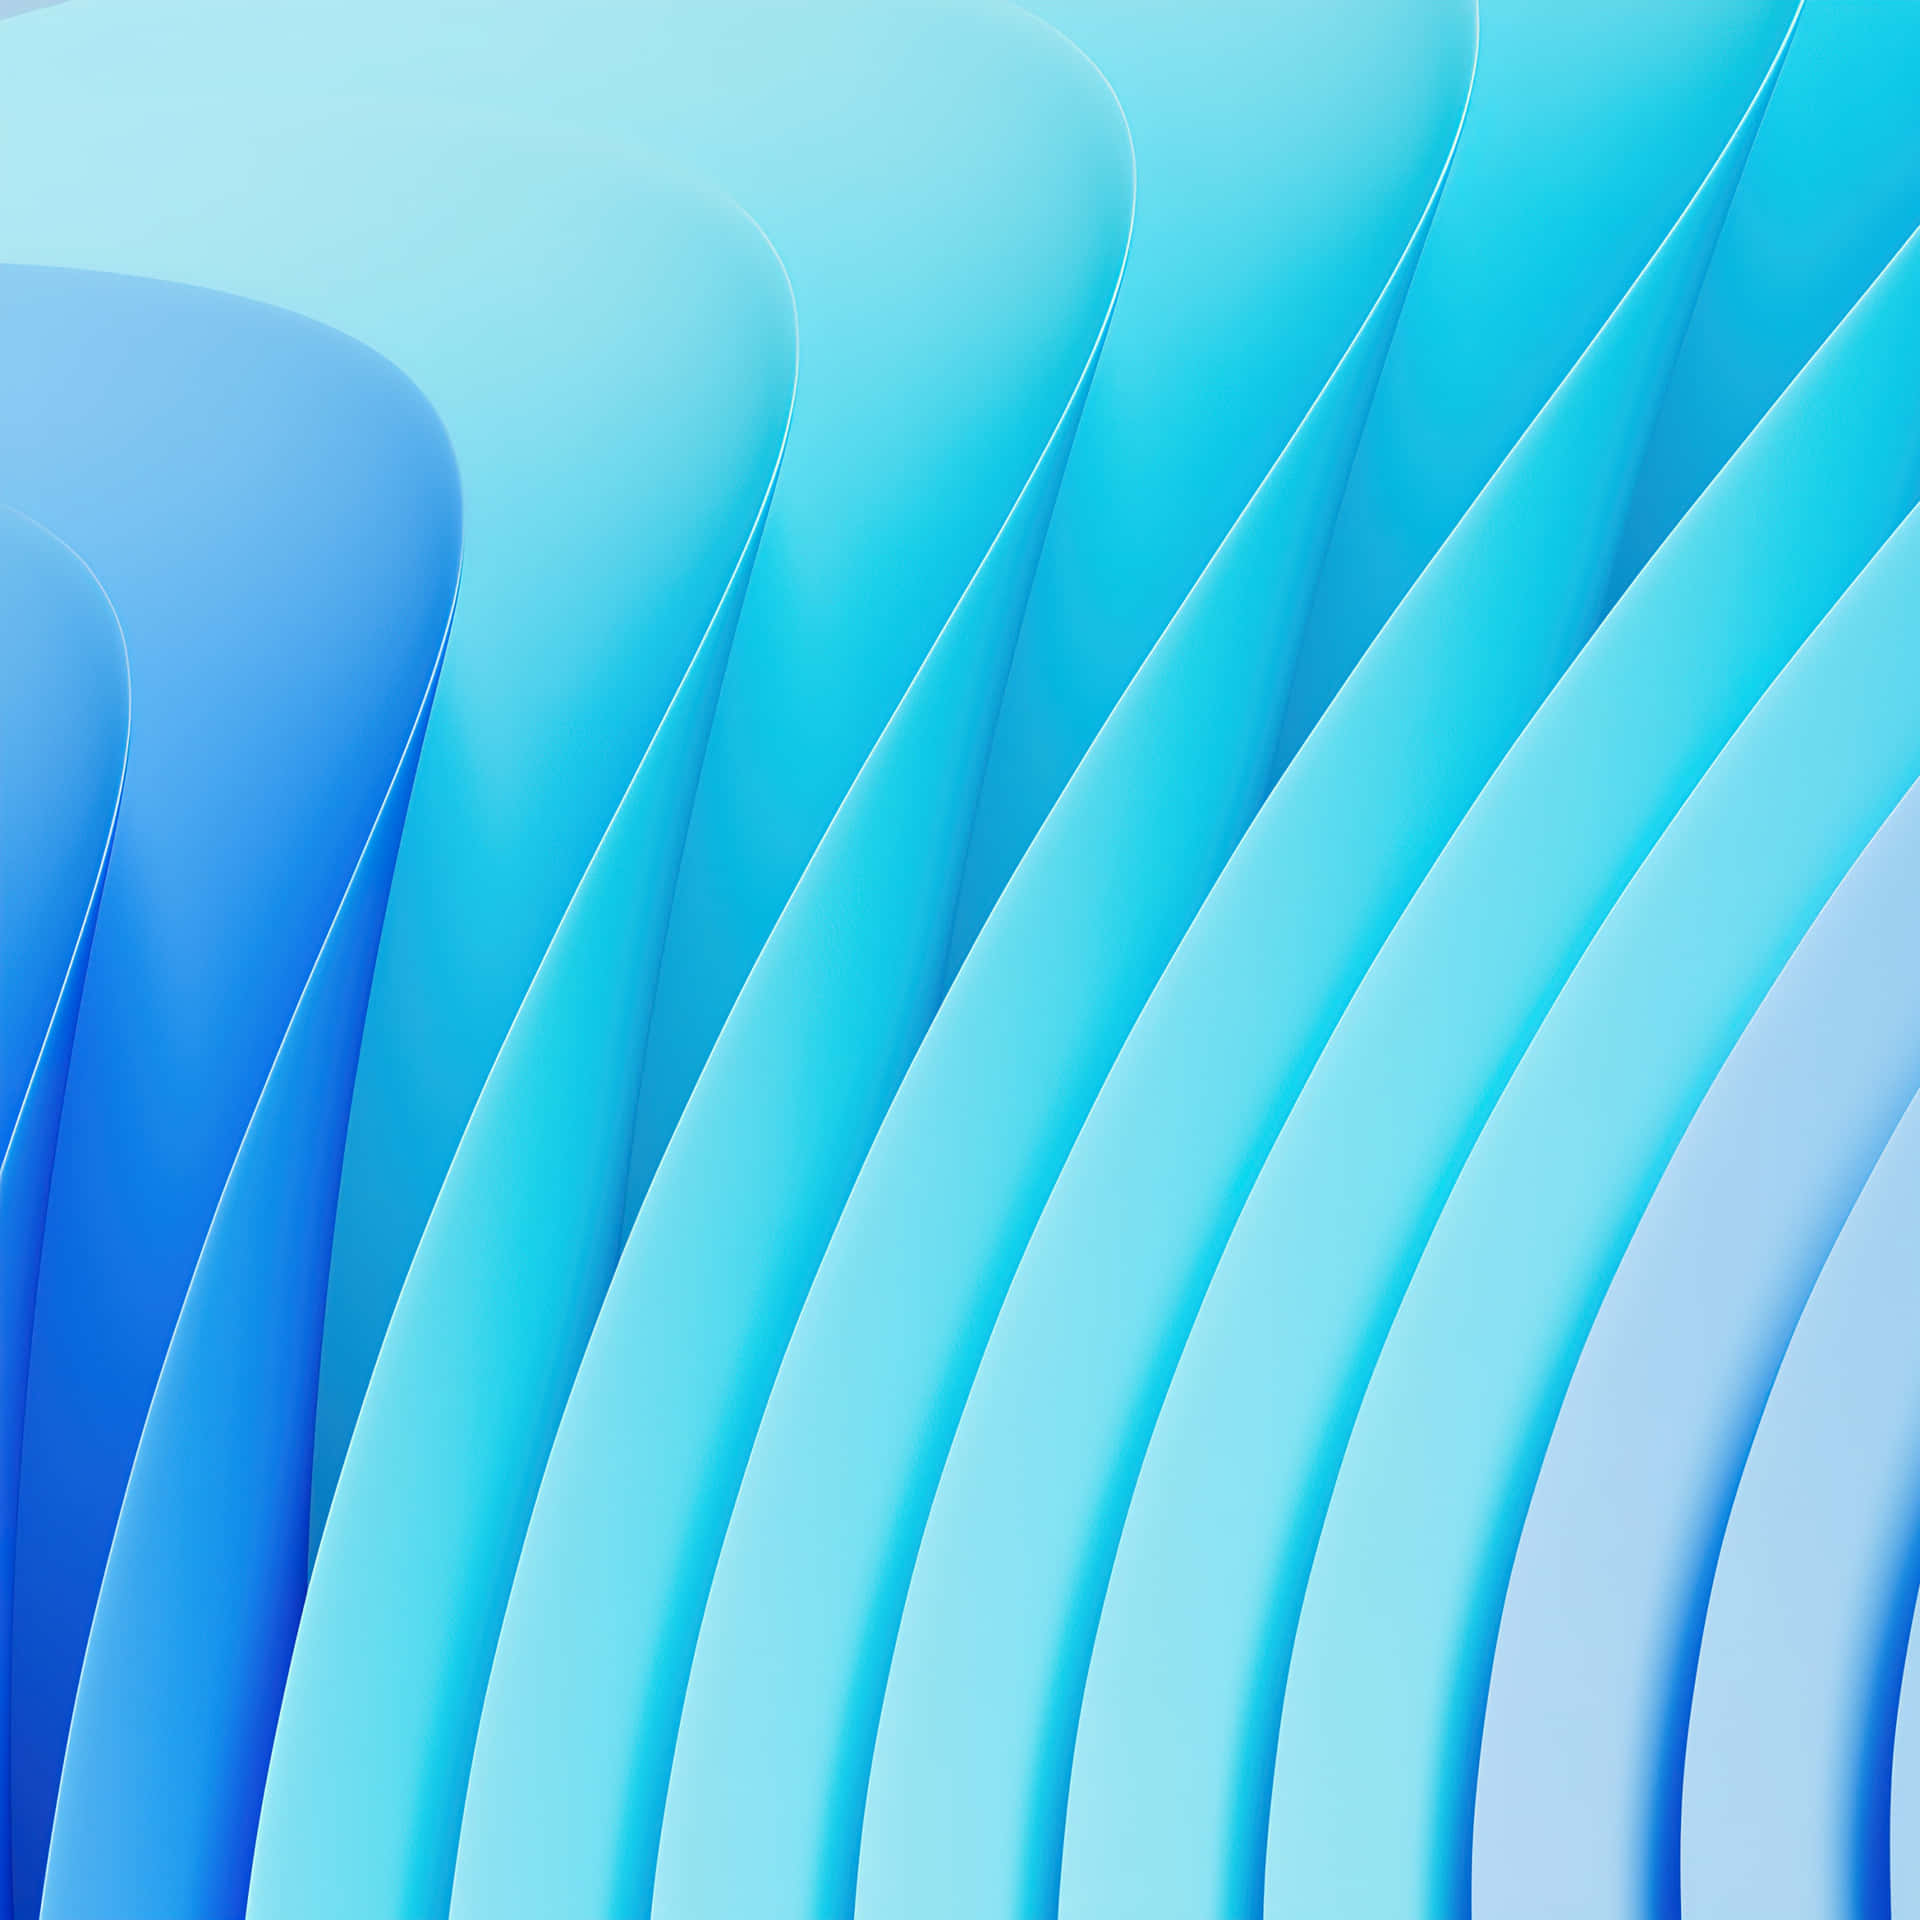 An abstract high-resolution blue background